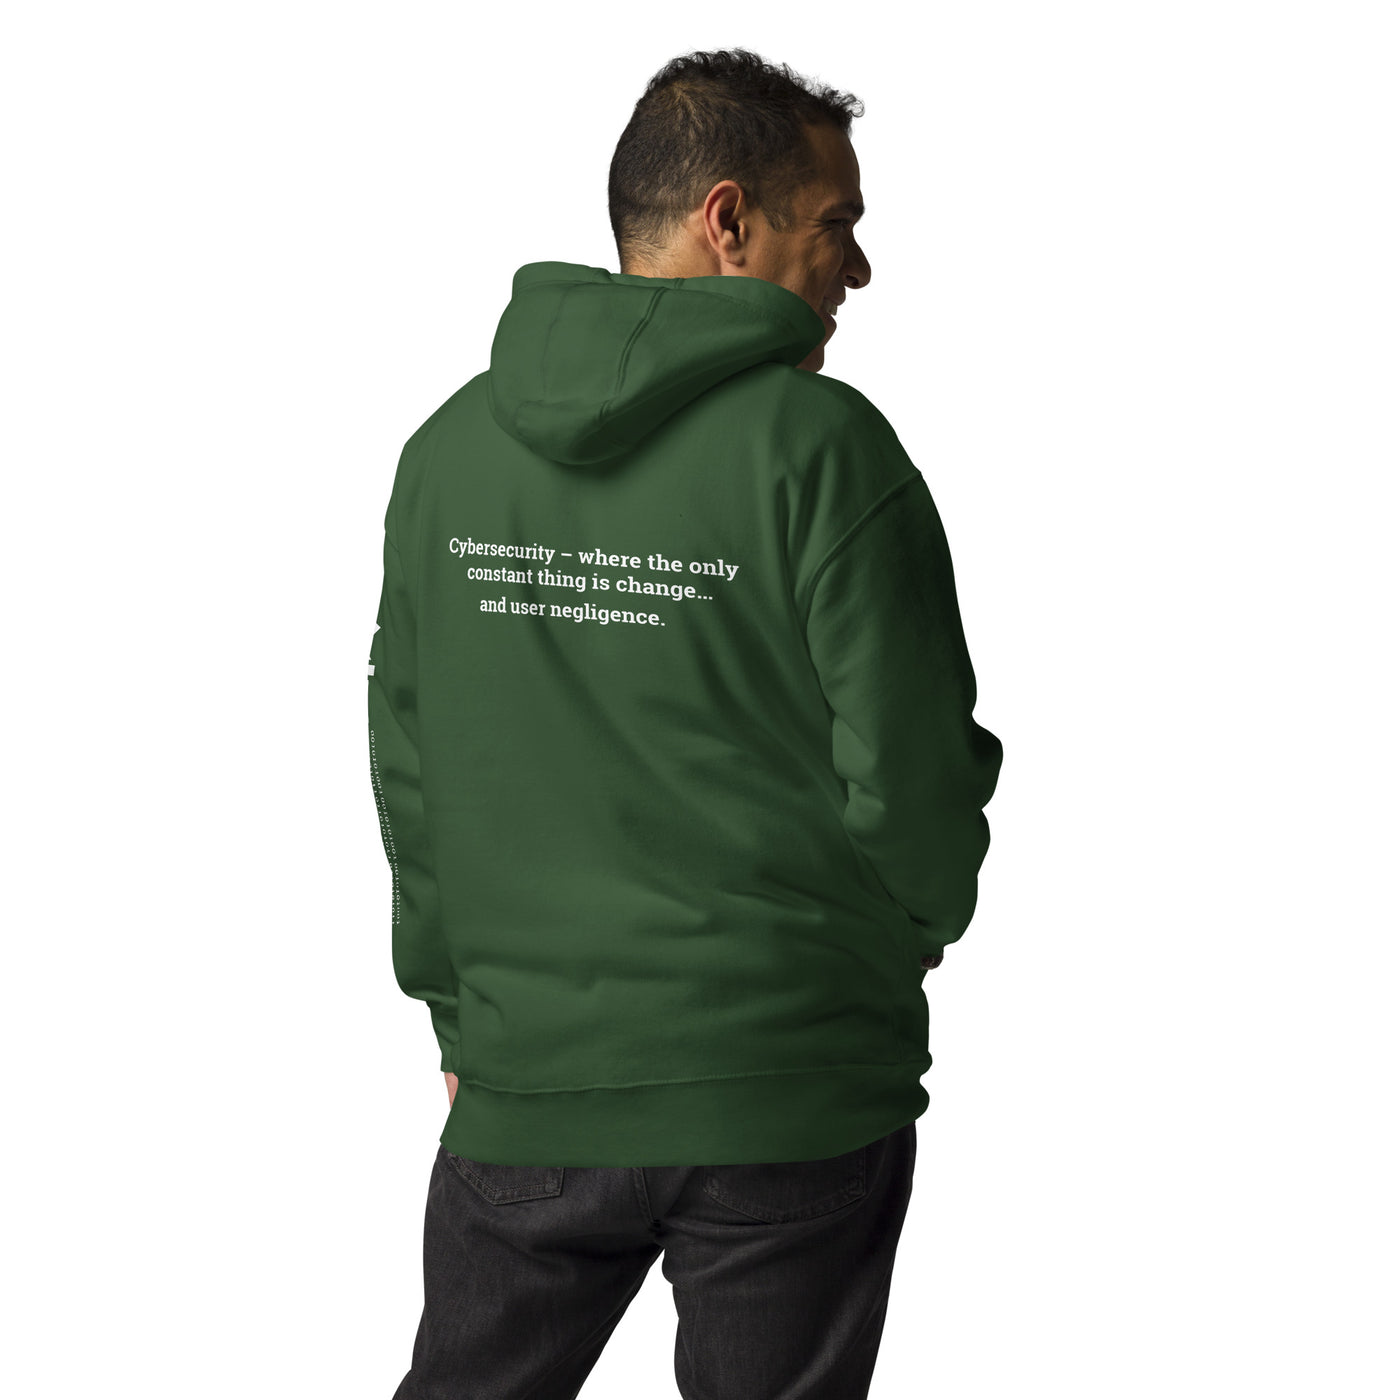 Cybersecurity where the only constant thing is change and user negligence V1 - Unisex Hoodie ( Back Print )